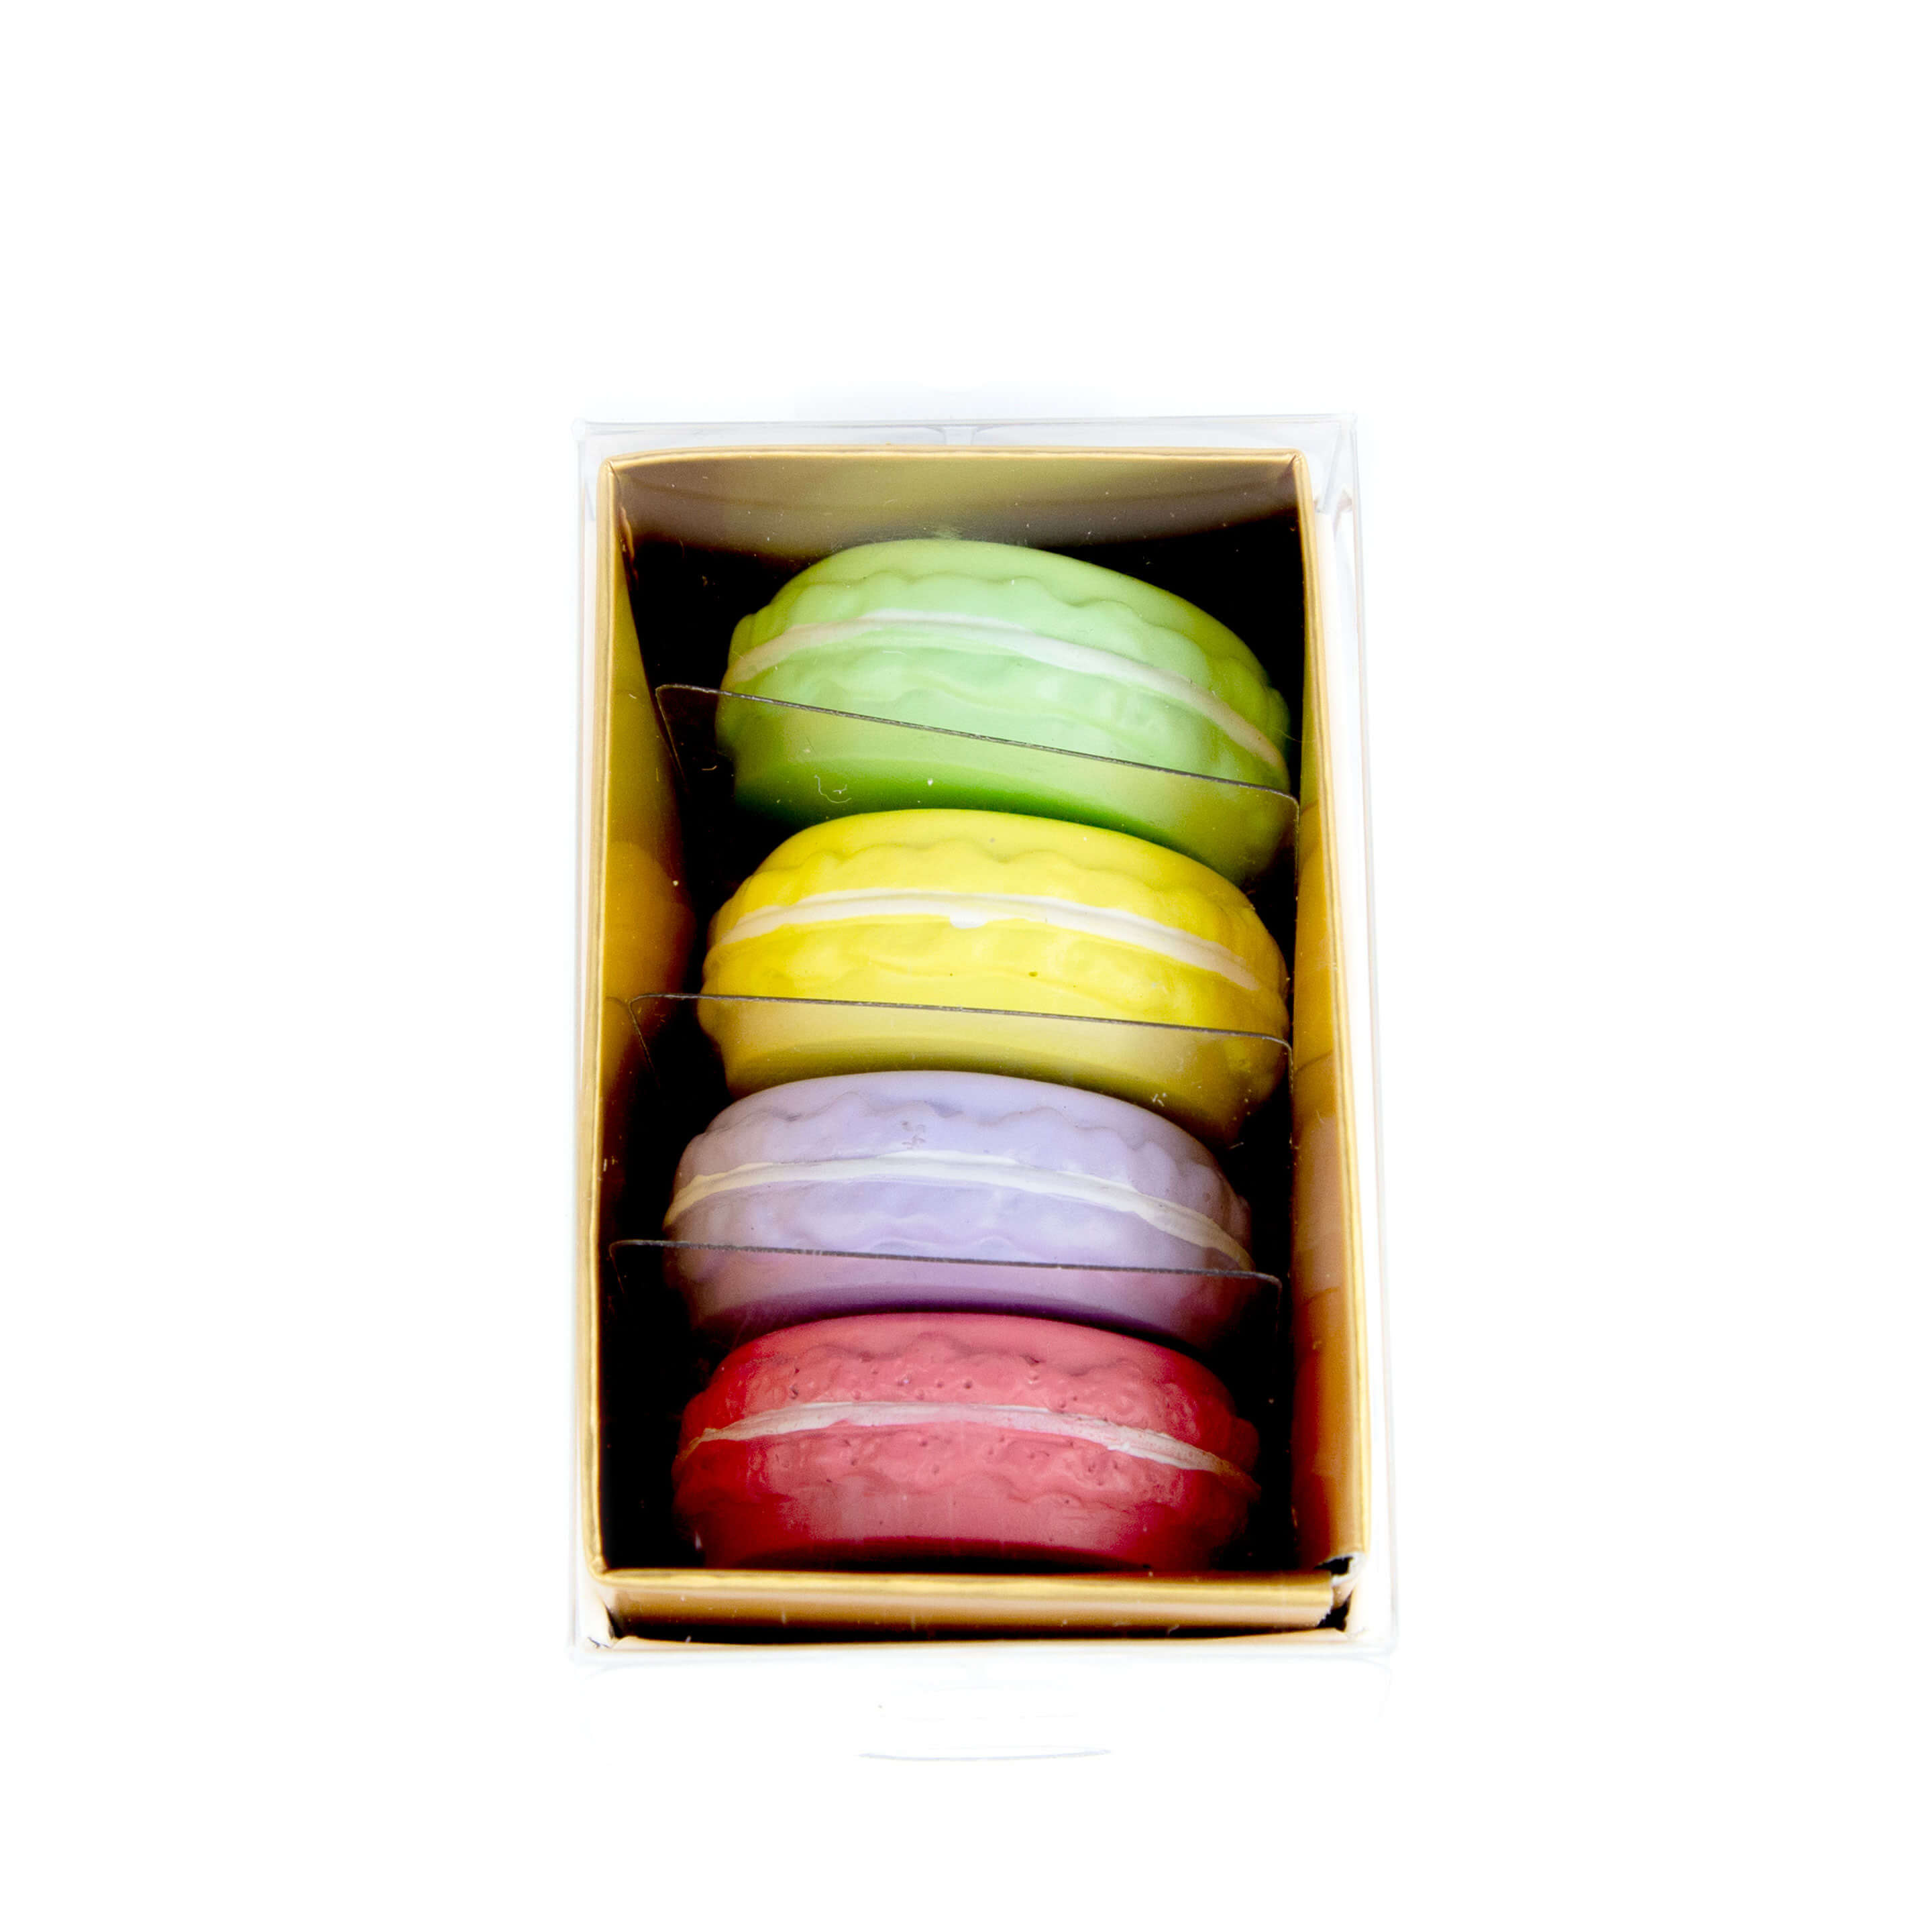 colorful MACARON magnets ICONIC packaging s/4